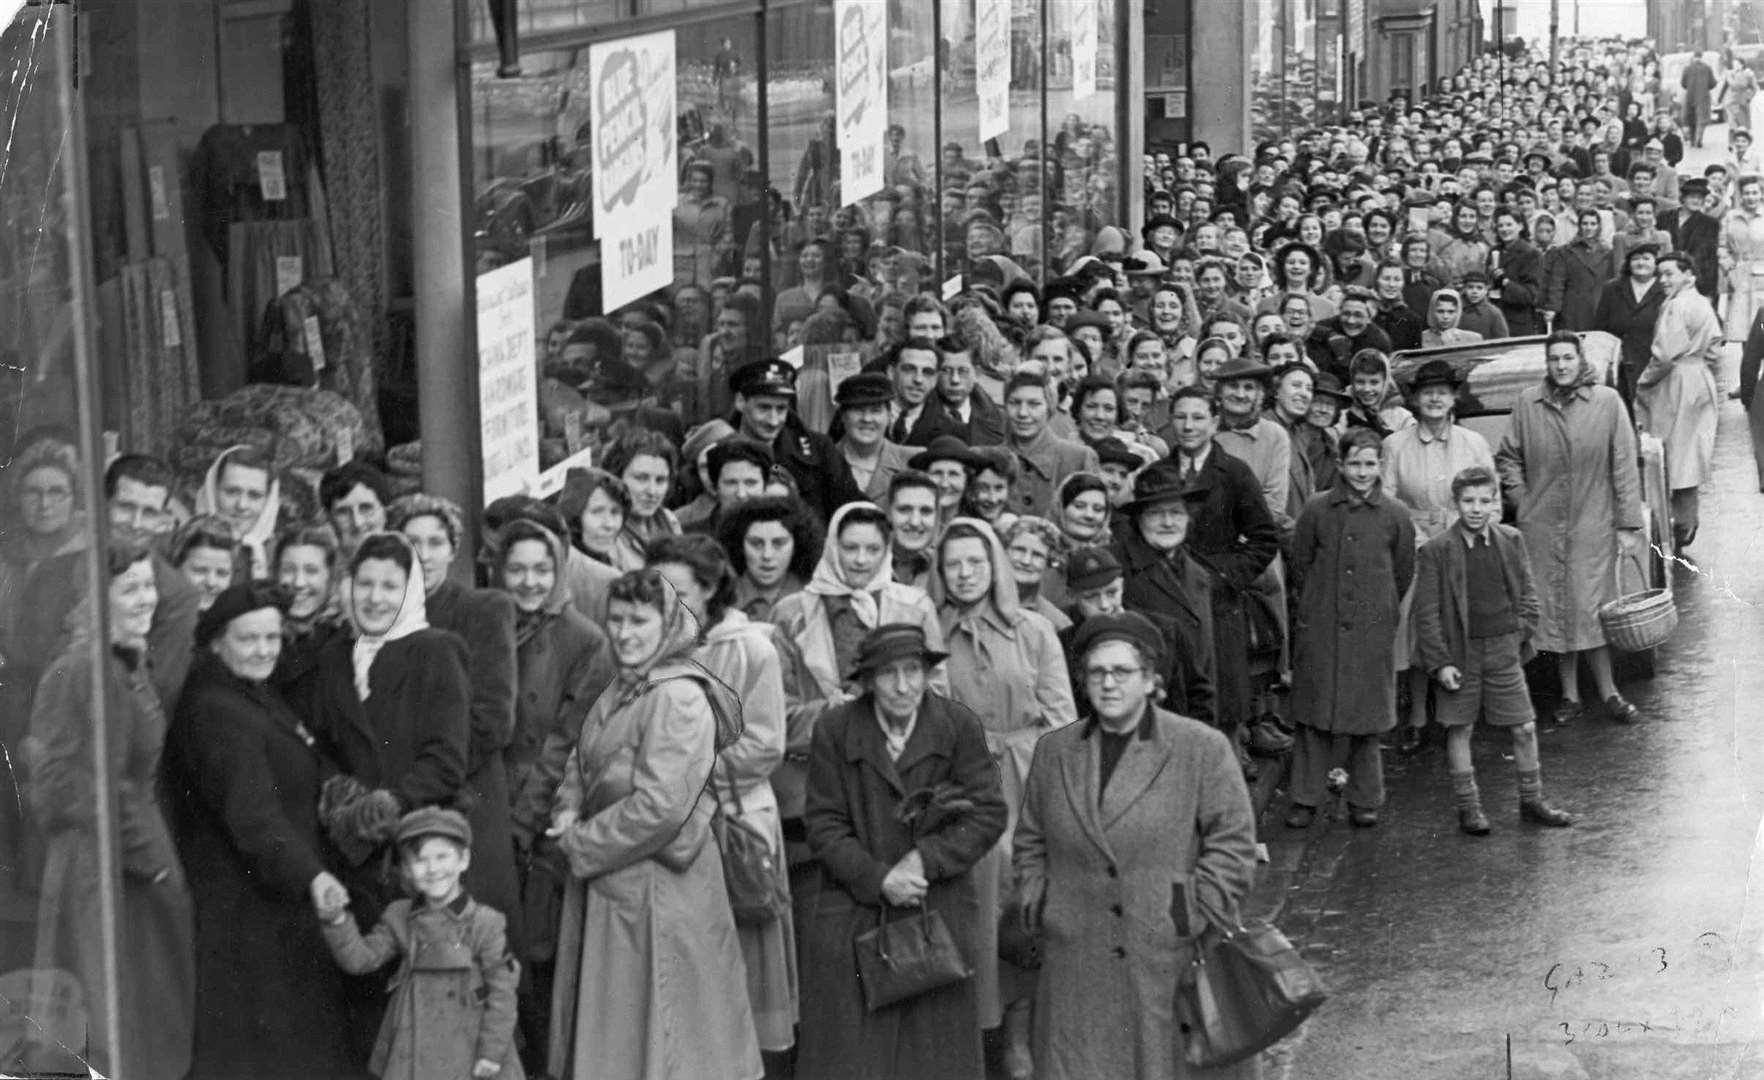 By 1950 Britain was beginning to rid itself of post-war austerity. This was the queue for a sale at Dunnings the drapers in Maidstone that February. Image from: Images of Maidstone book